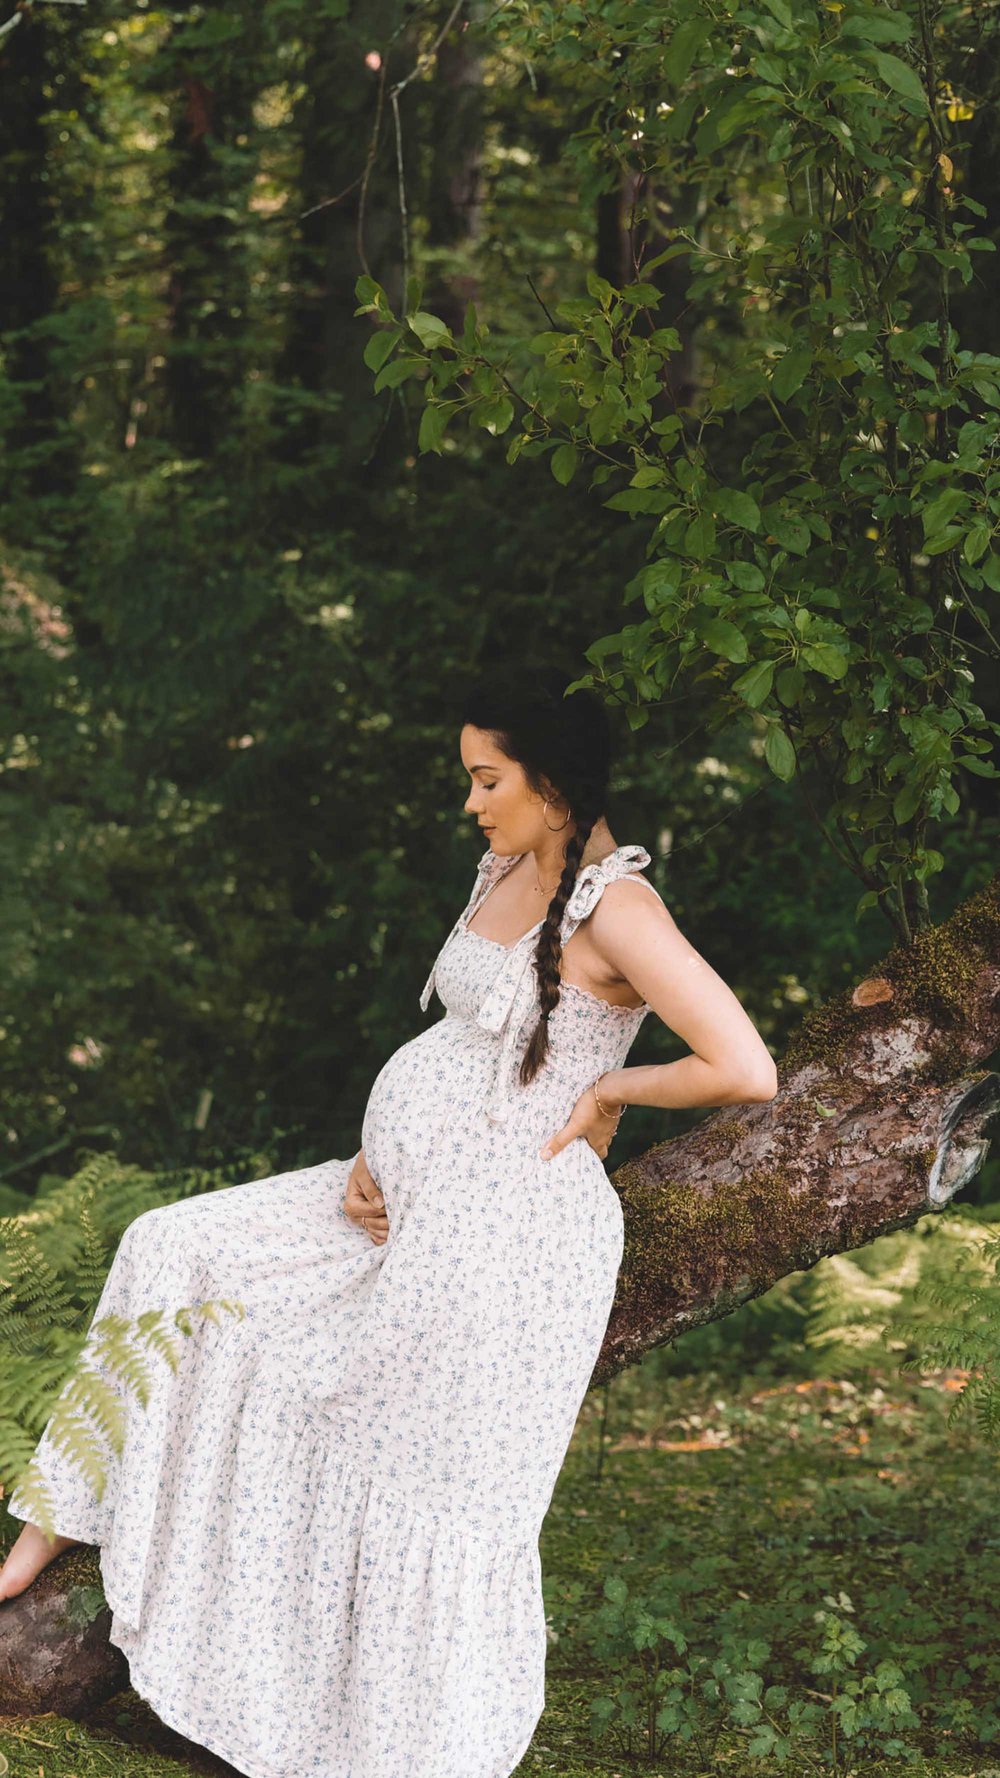 Casual Floral Maternity Dress Outfit. @sarahchristine wearing Nothing Fits Women’s Classic Nursing Momoka Dress with smocked chest in Seattle, Washington - 9.jpg